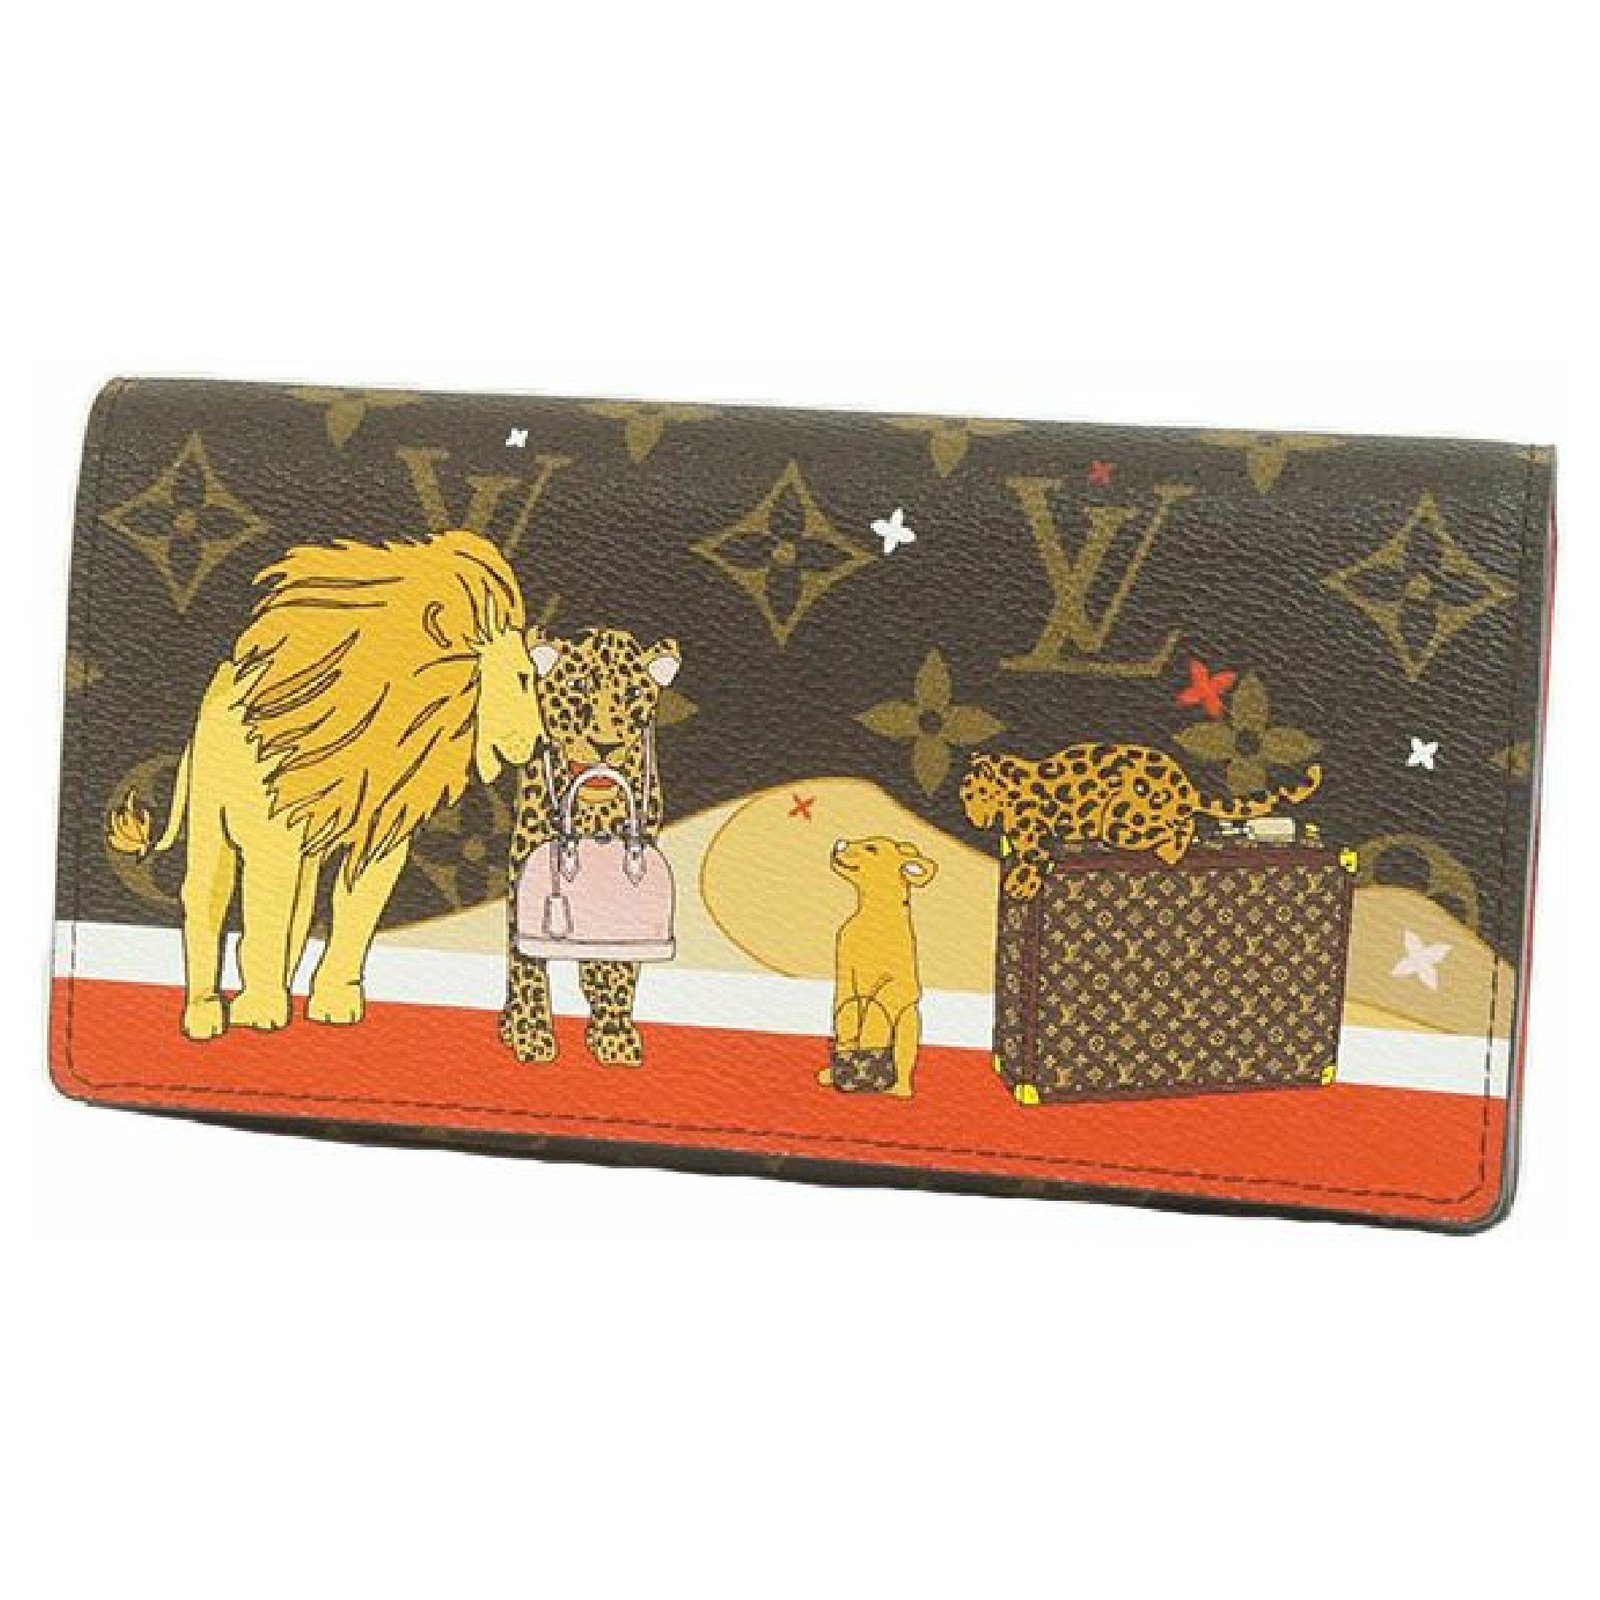 vuitton holiday collection